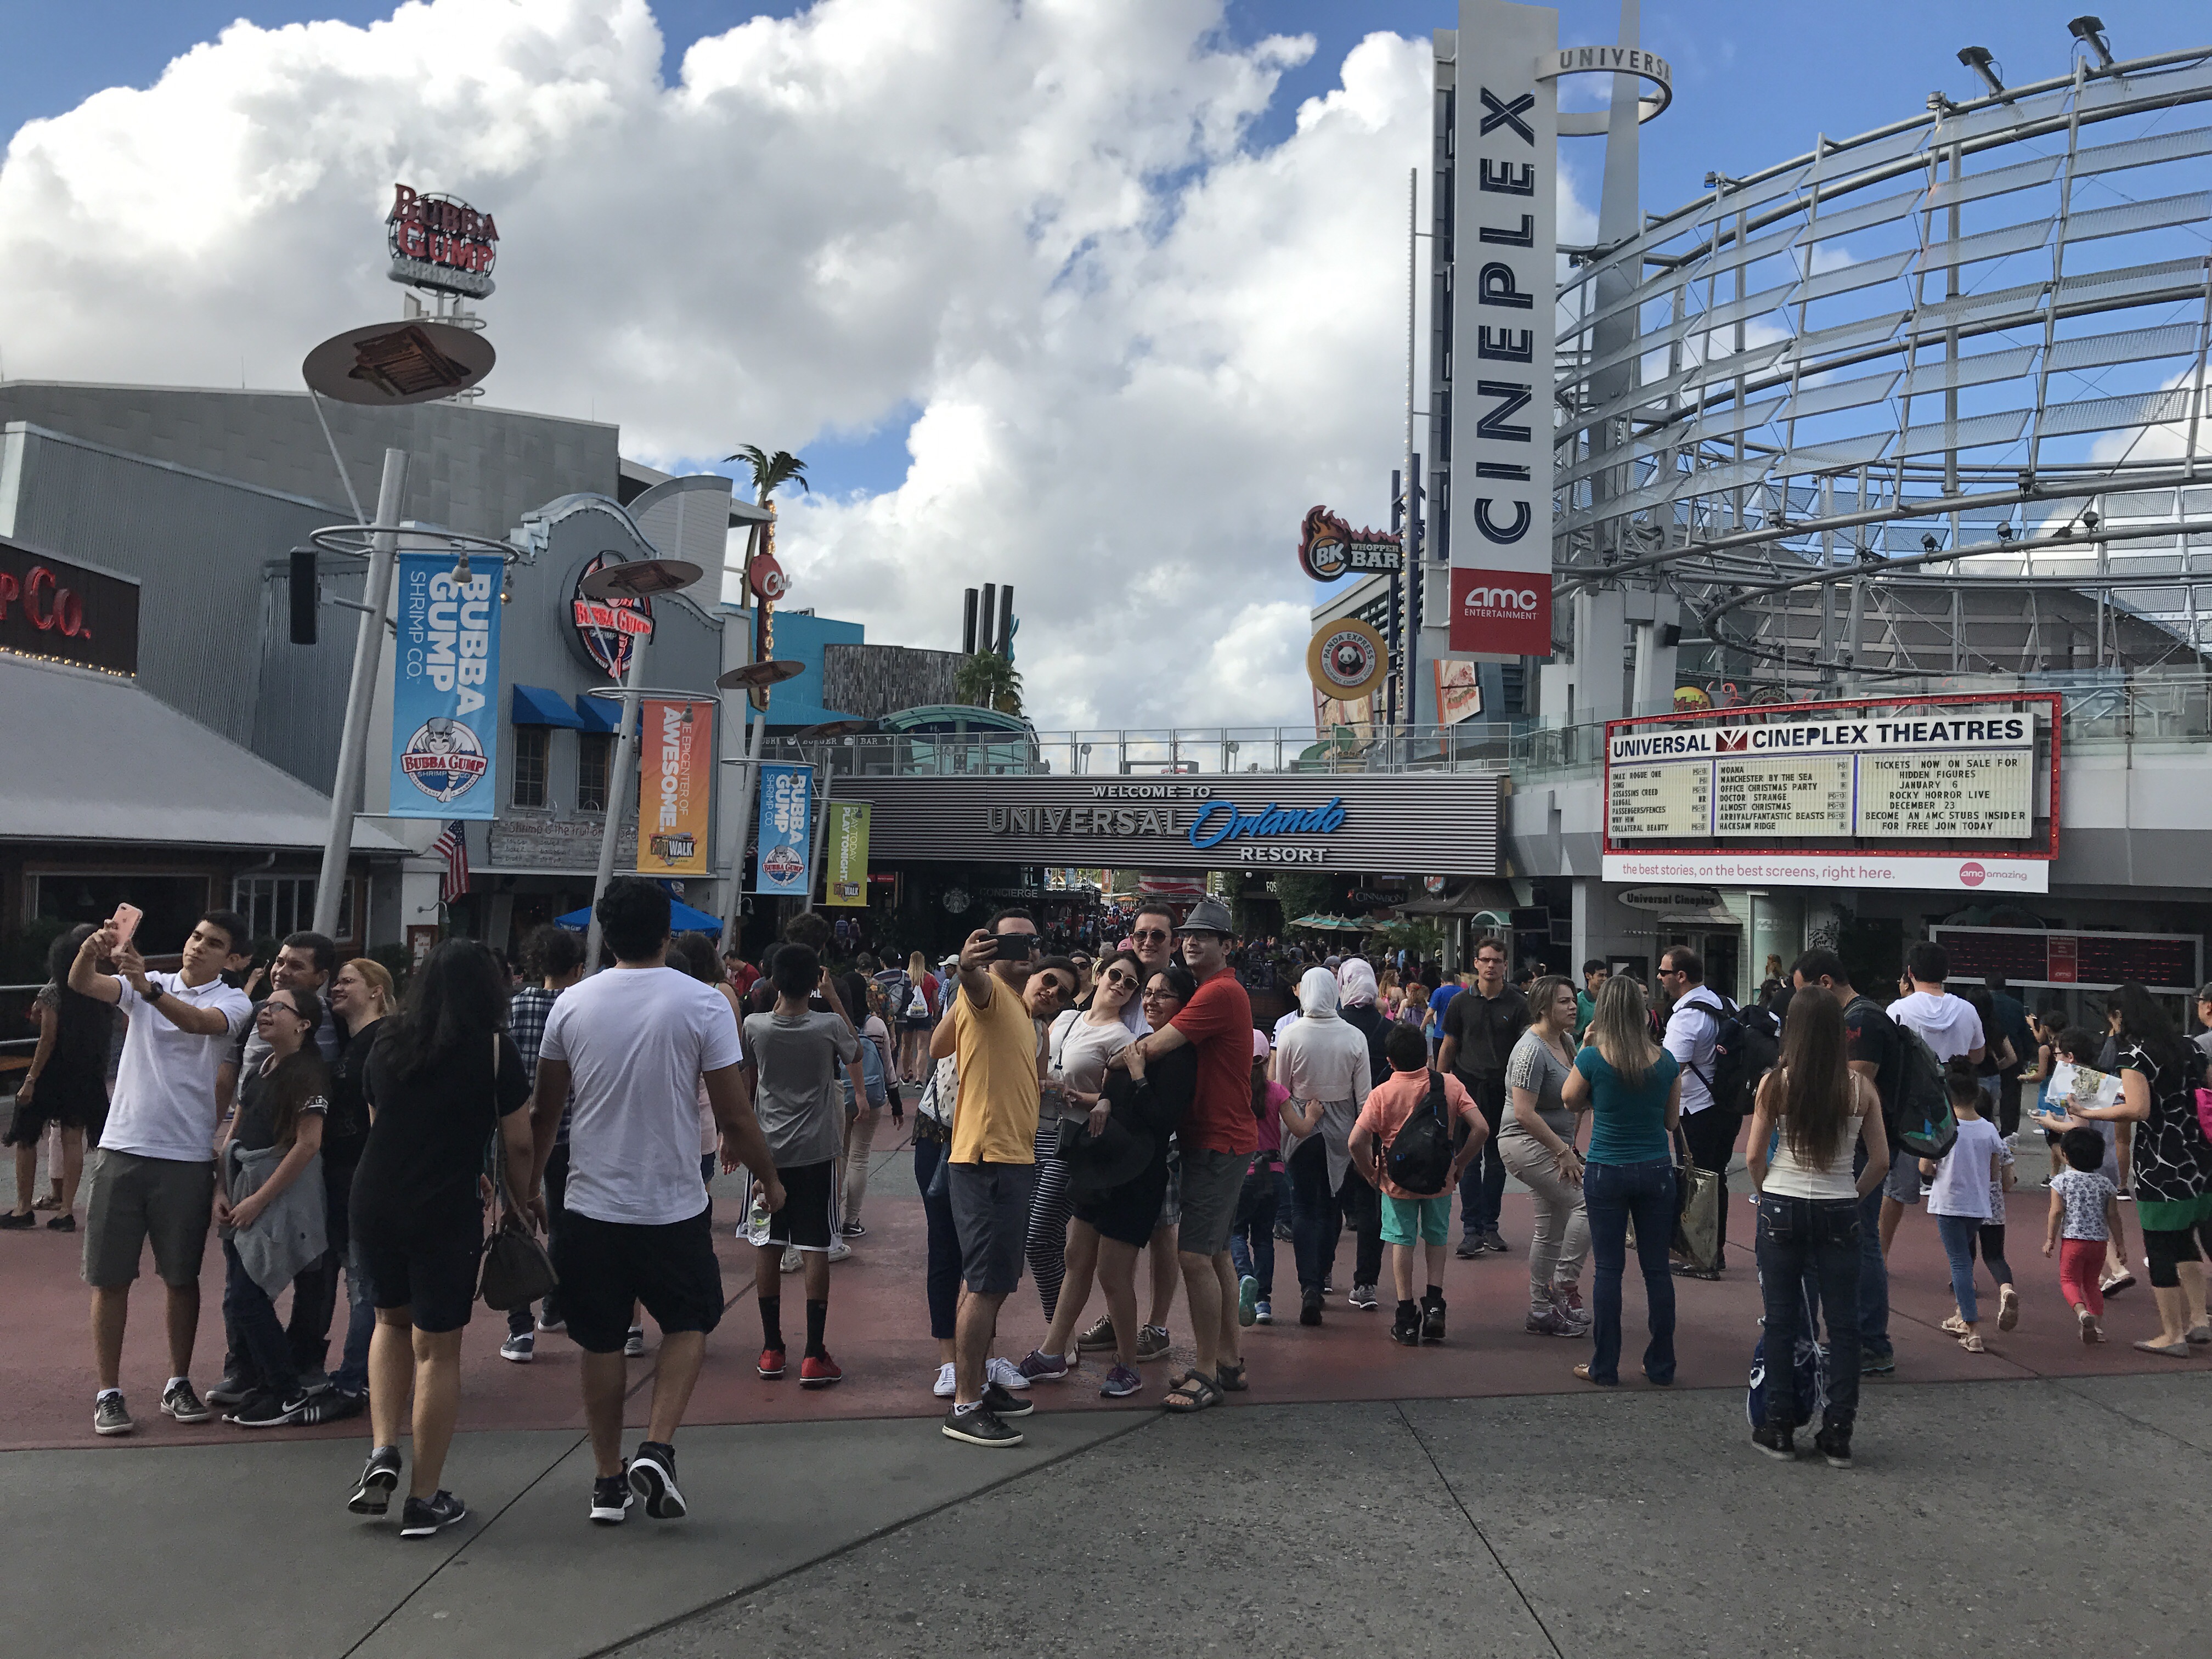 What to Know Before Your Visit to Universal Orlando